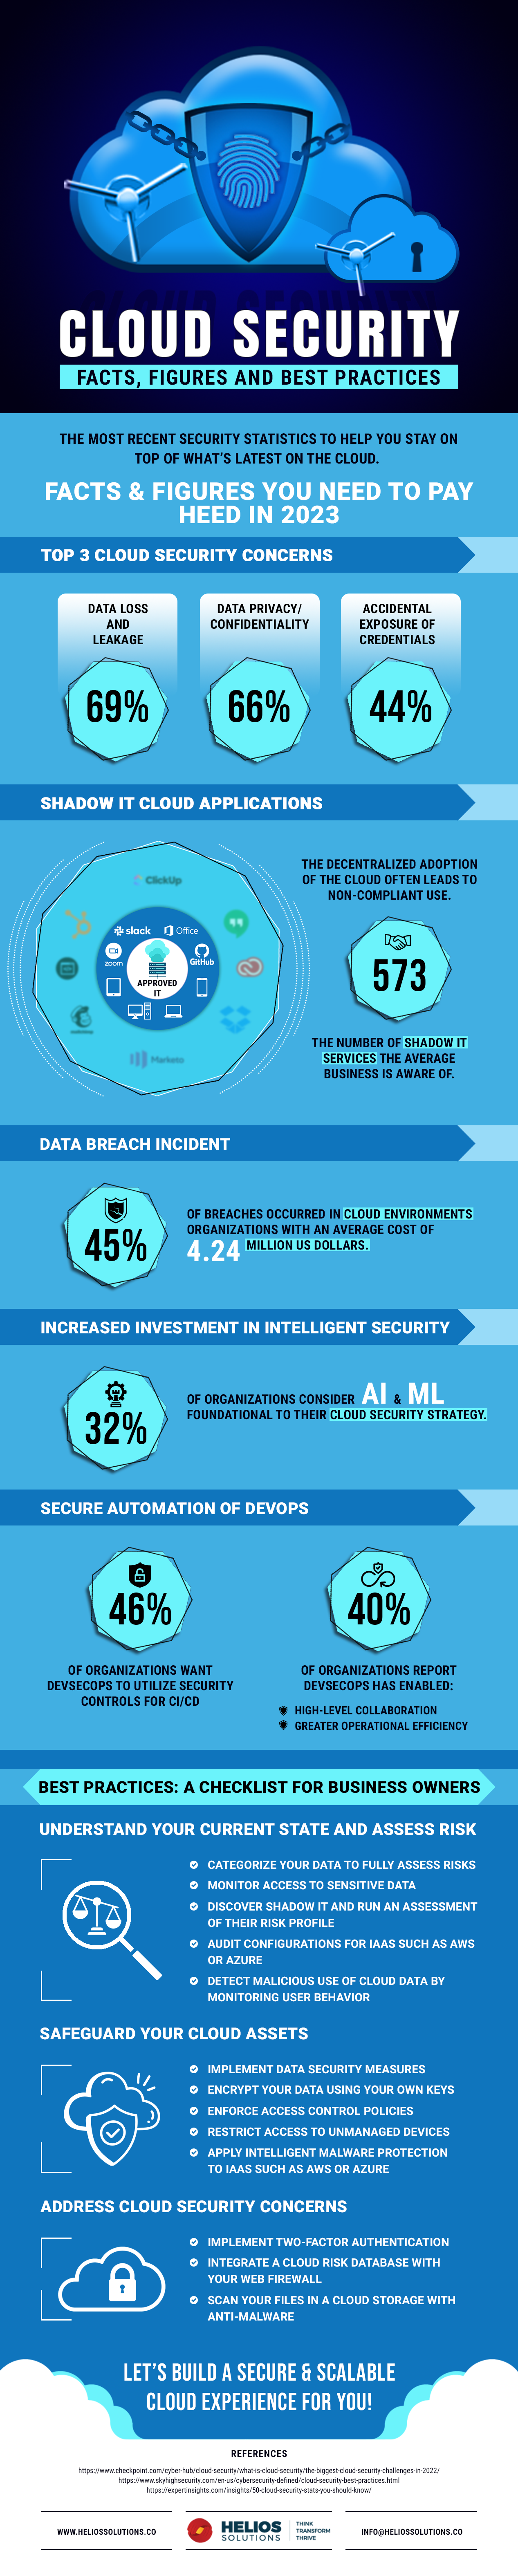 Securing Your Cloud Key Statistics and Best Practices for Business Owners - INFOGRAPHIC